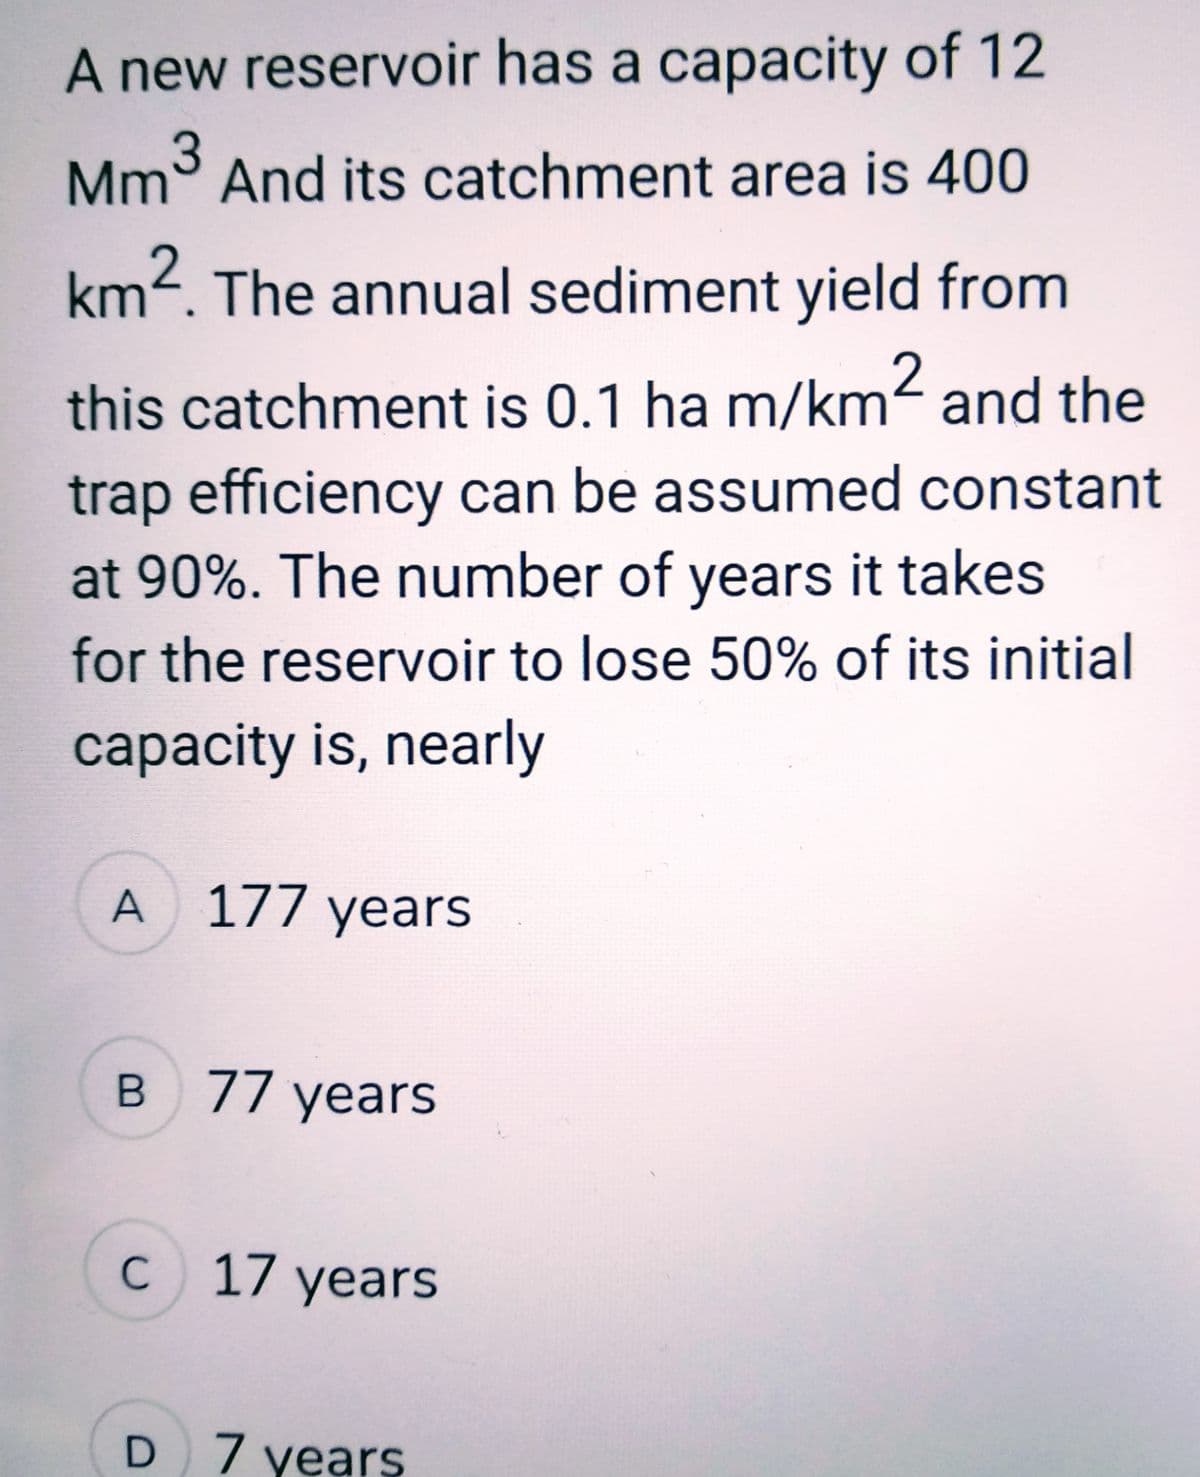 A new reservoir has a capacity of 12
Mm³ And its catchment area is 400
3
km². The annual sediment yield from
this catchment is 0.1 ha m/km² and the
trap efficiency can be assumed constant
at 90%. The number of years it takes
for the reservoir to lose 50% of its initial
capacity is, nearly
A 177 years
B 77 years
C c 17 years
D 7 years